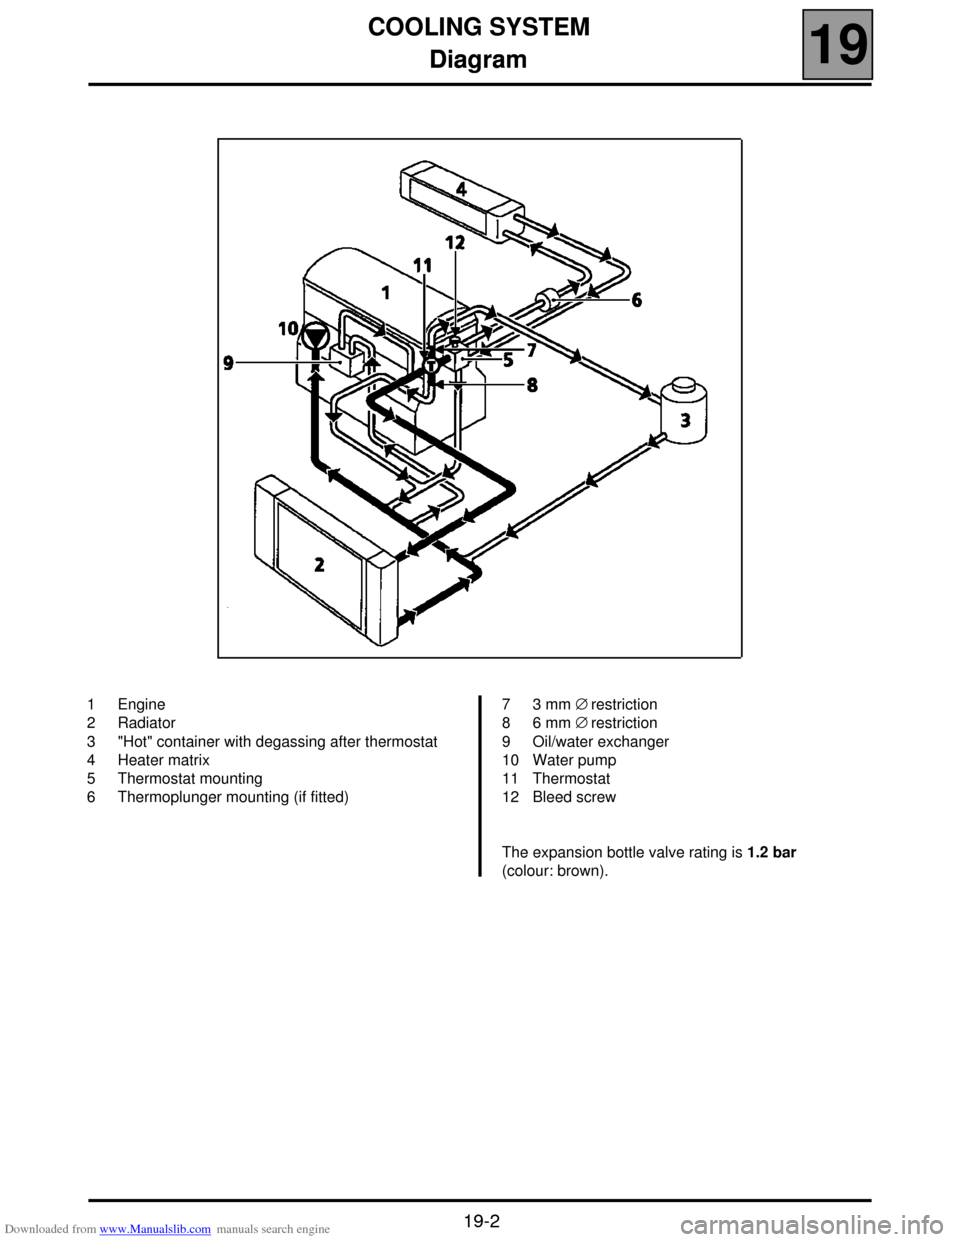 RENAULT SCENIC 2000 J64 / 1.G Technical Note 3426A Owners Manual Downloaded from www.Manualslib.com manuals search engine COOLING SYSTEM
Diagram
19
19-2
Diagram
1 Engine
2 Radiator
3 "Hot" container with degassing after thermostat
4 Heater matrix
5 Thermostat mount